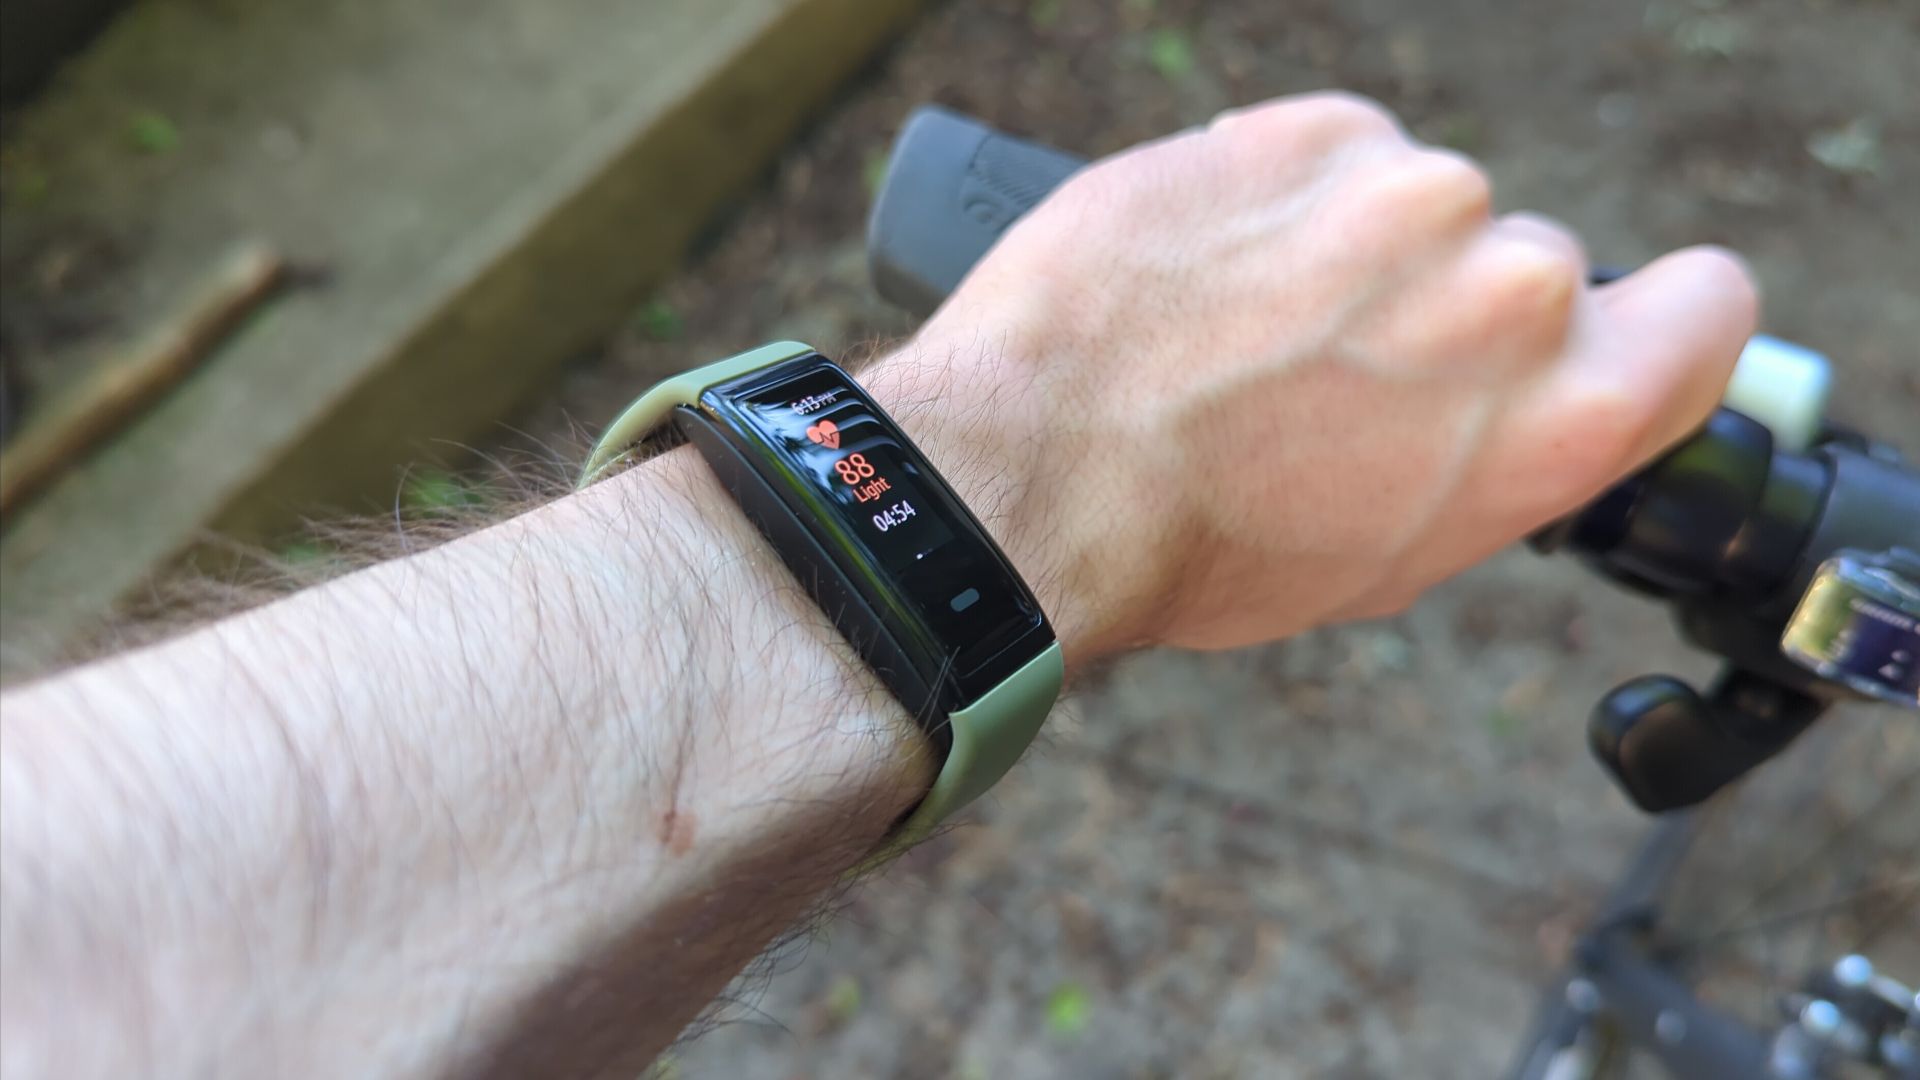 Halo view fitness band on a person's arm holding a bike handle.